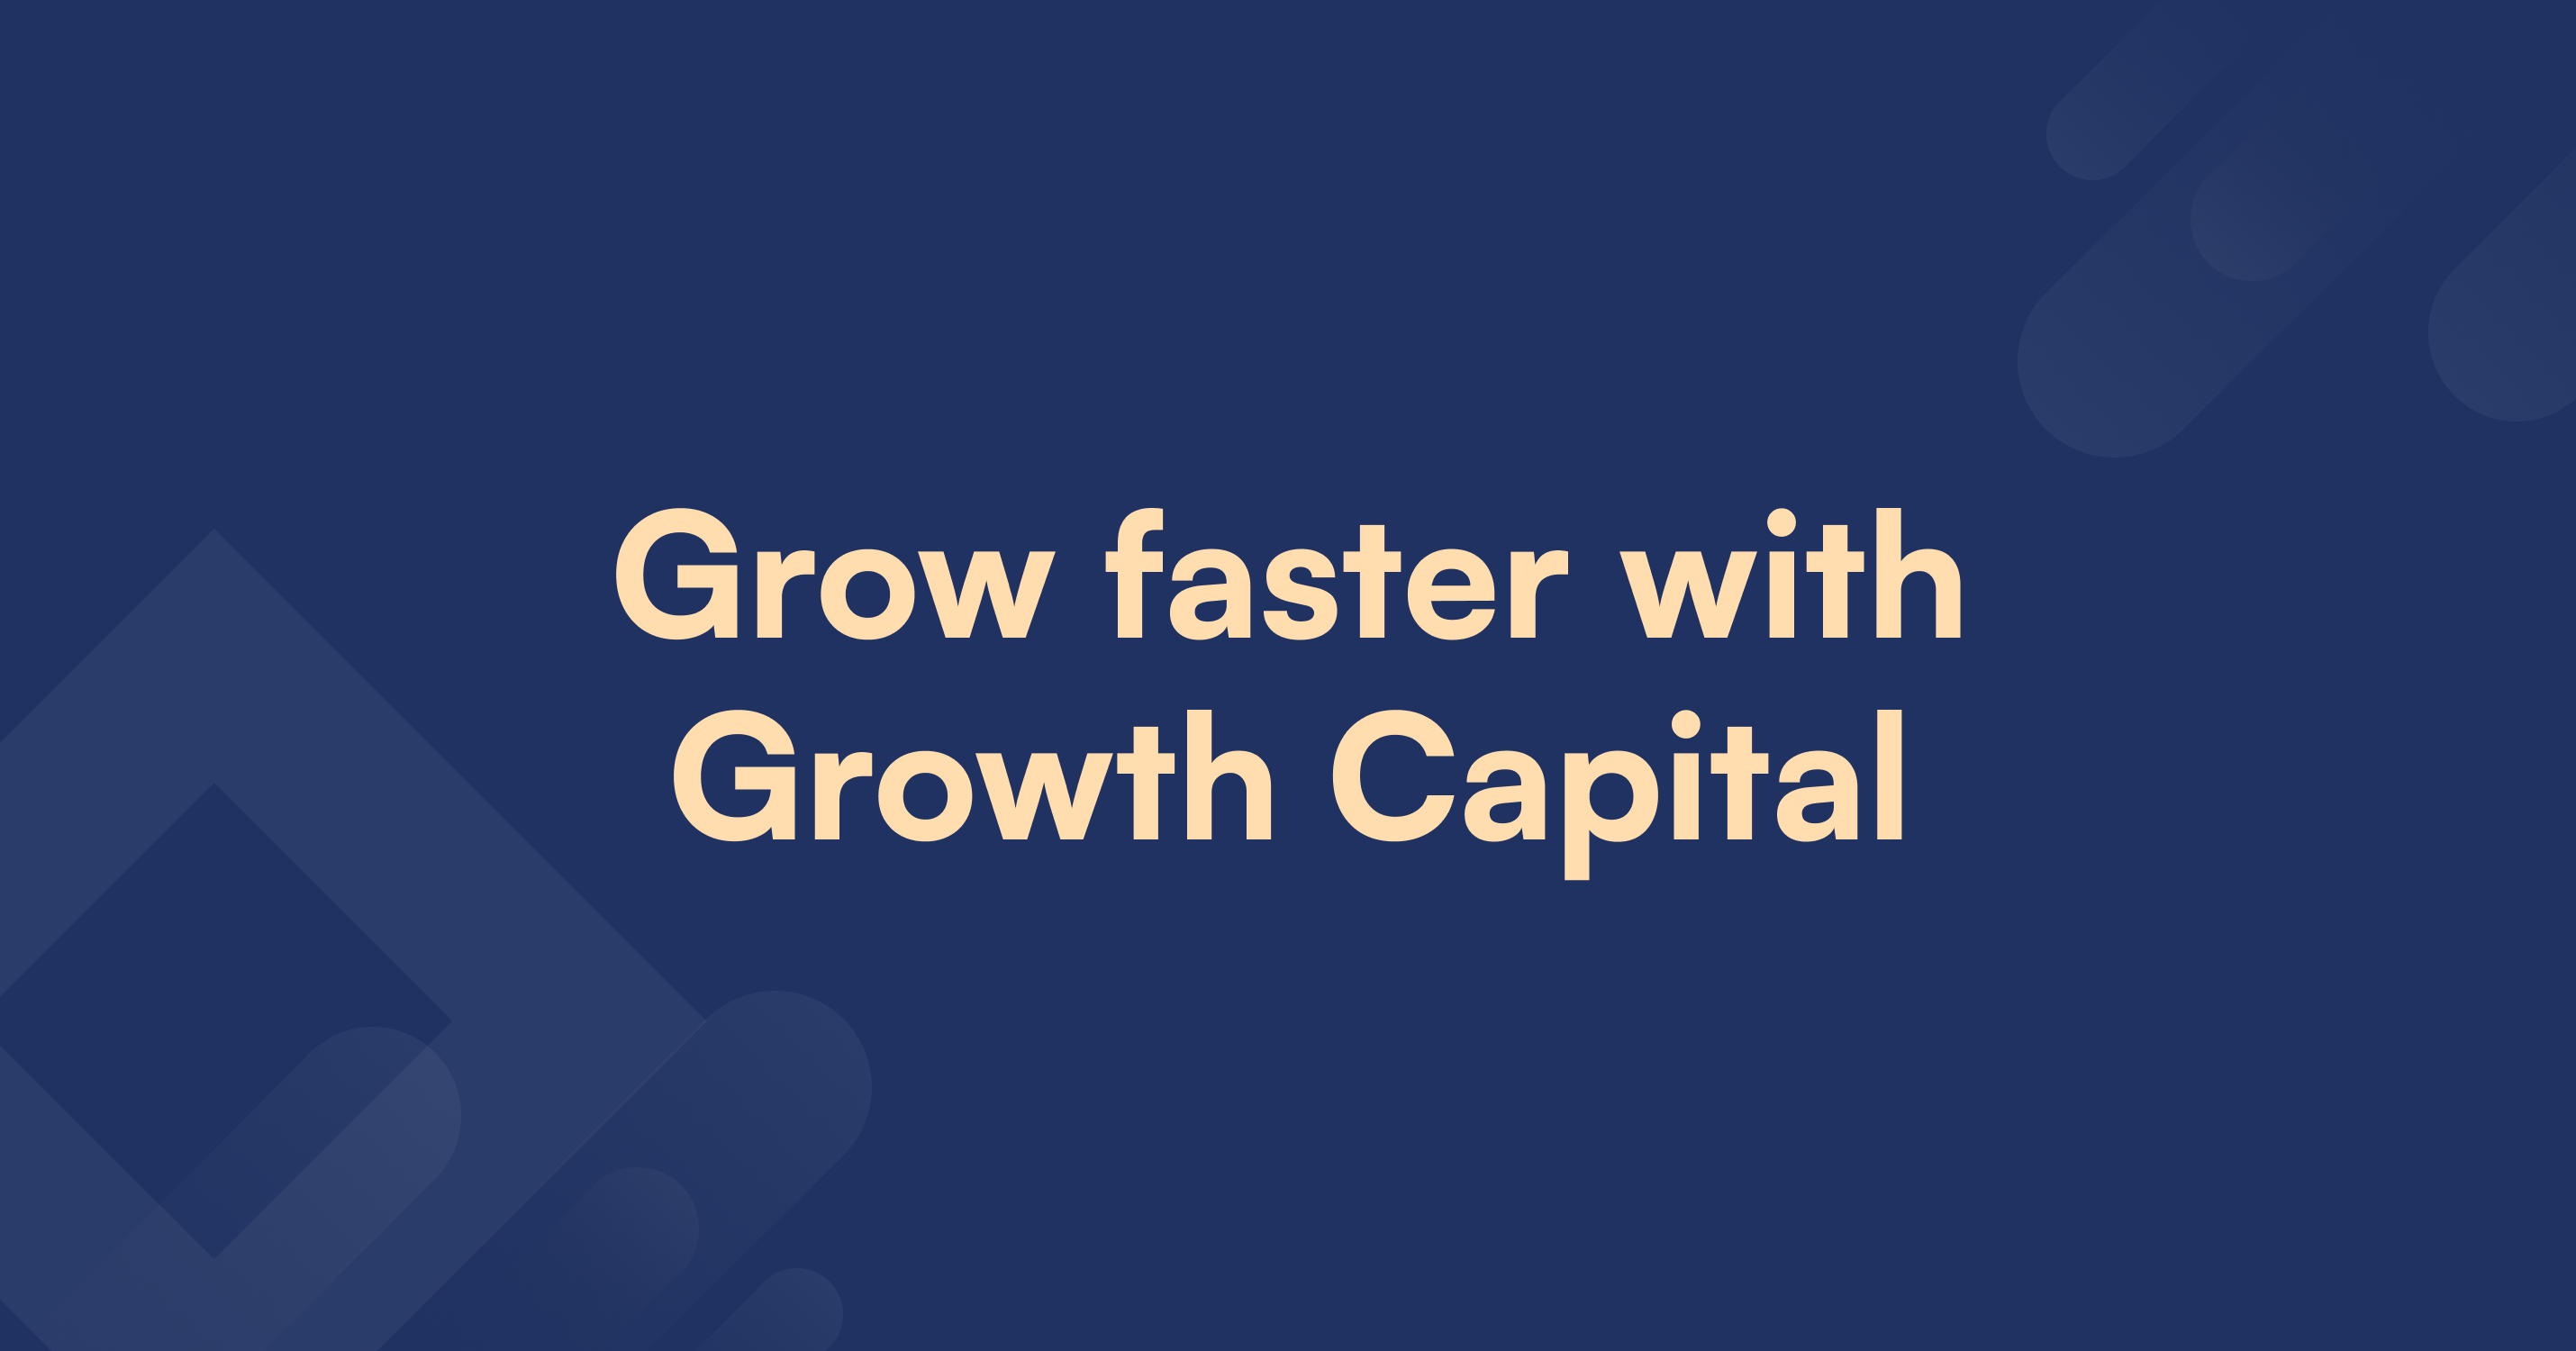 Grow faster with Growth Capital